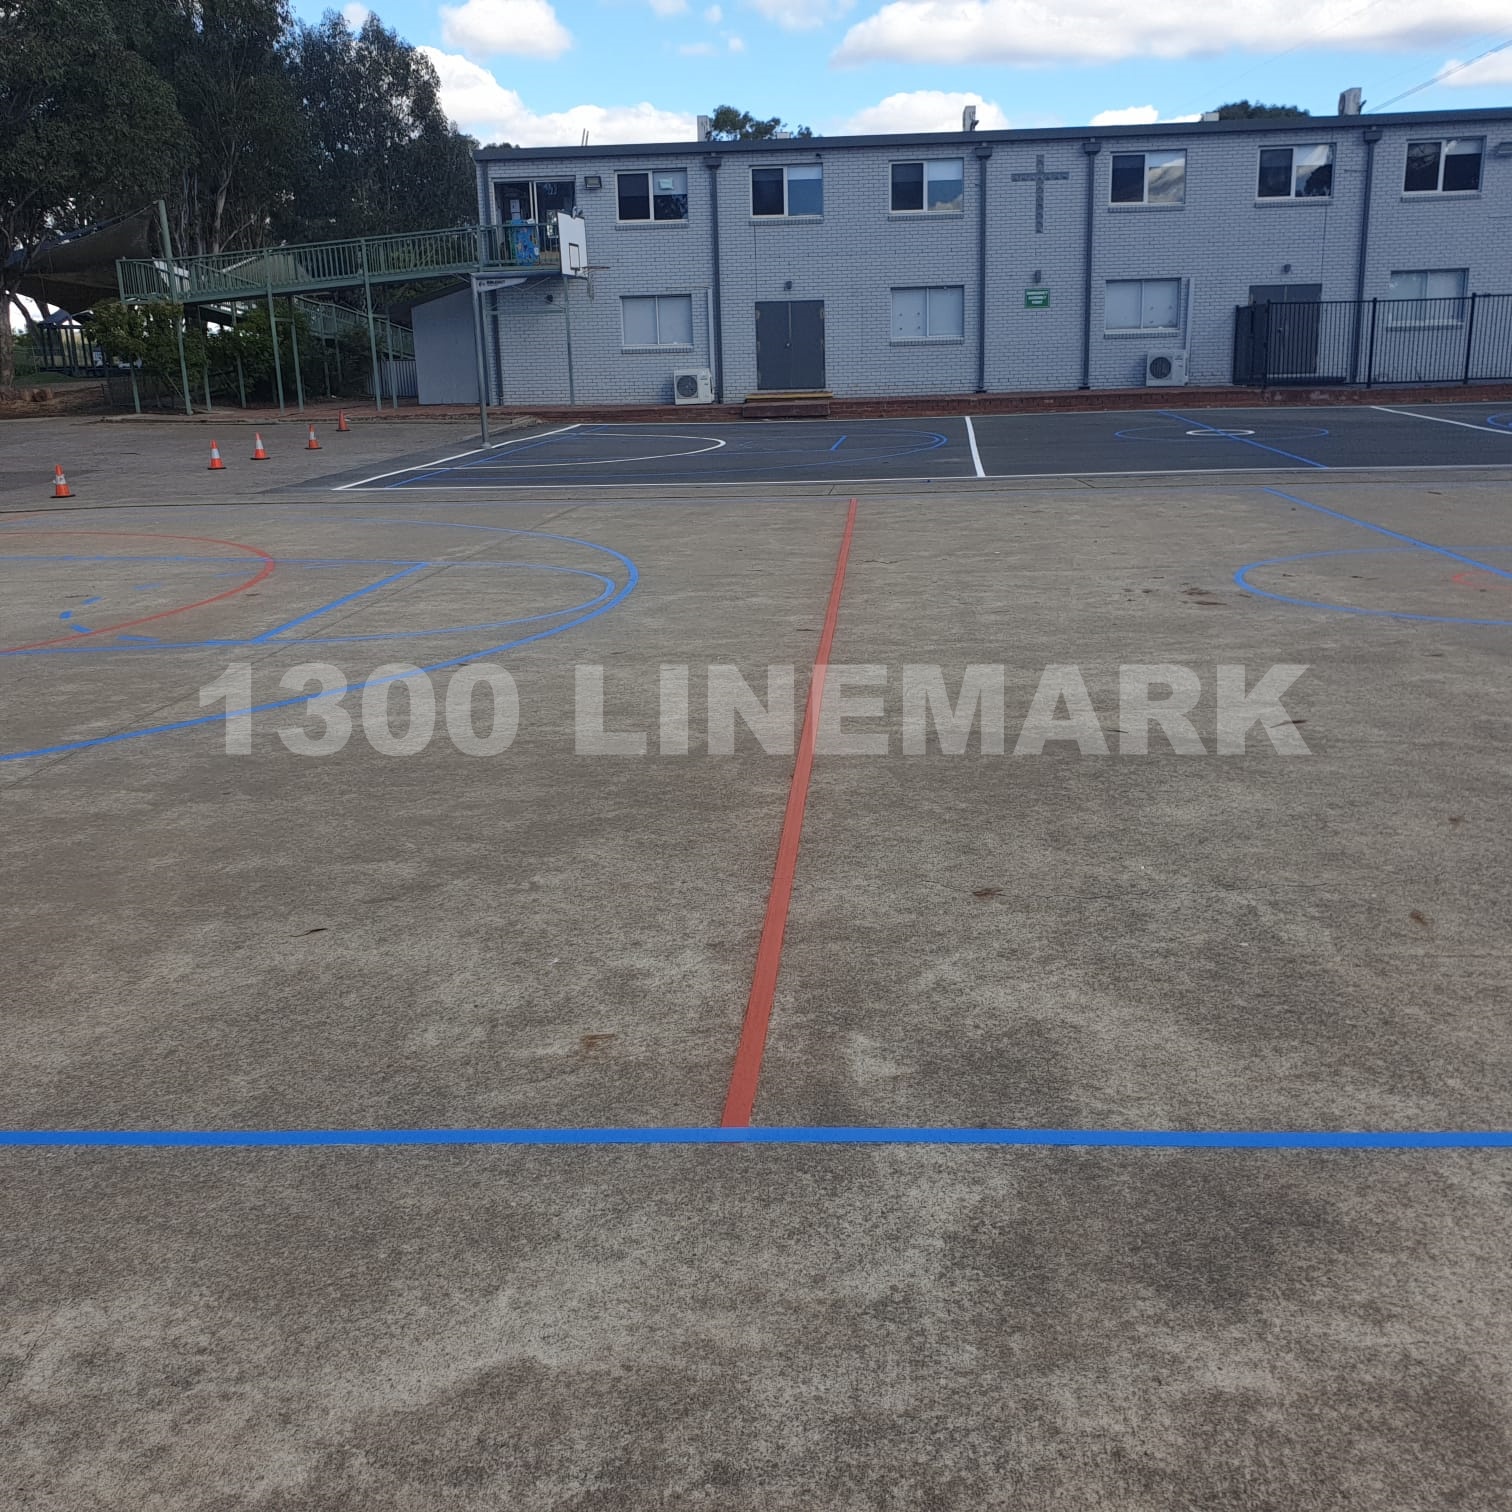 special events line marking basketball court